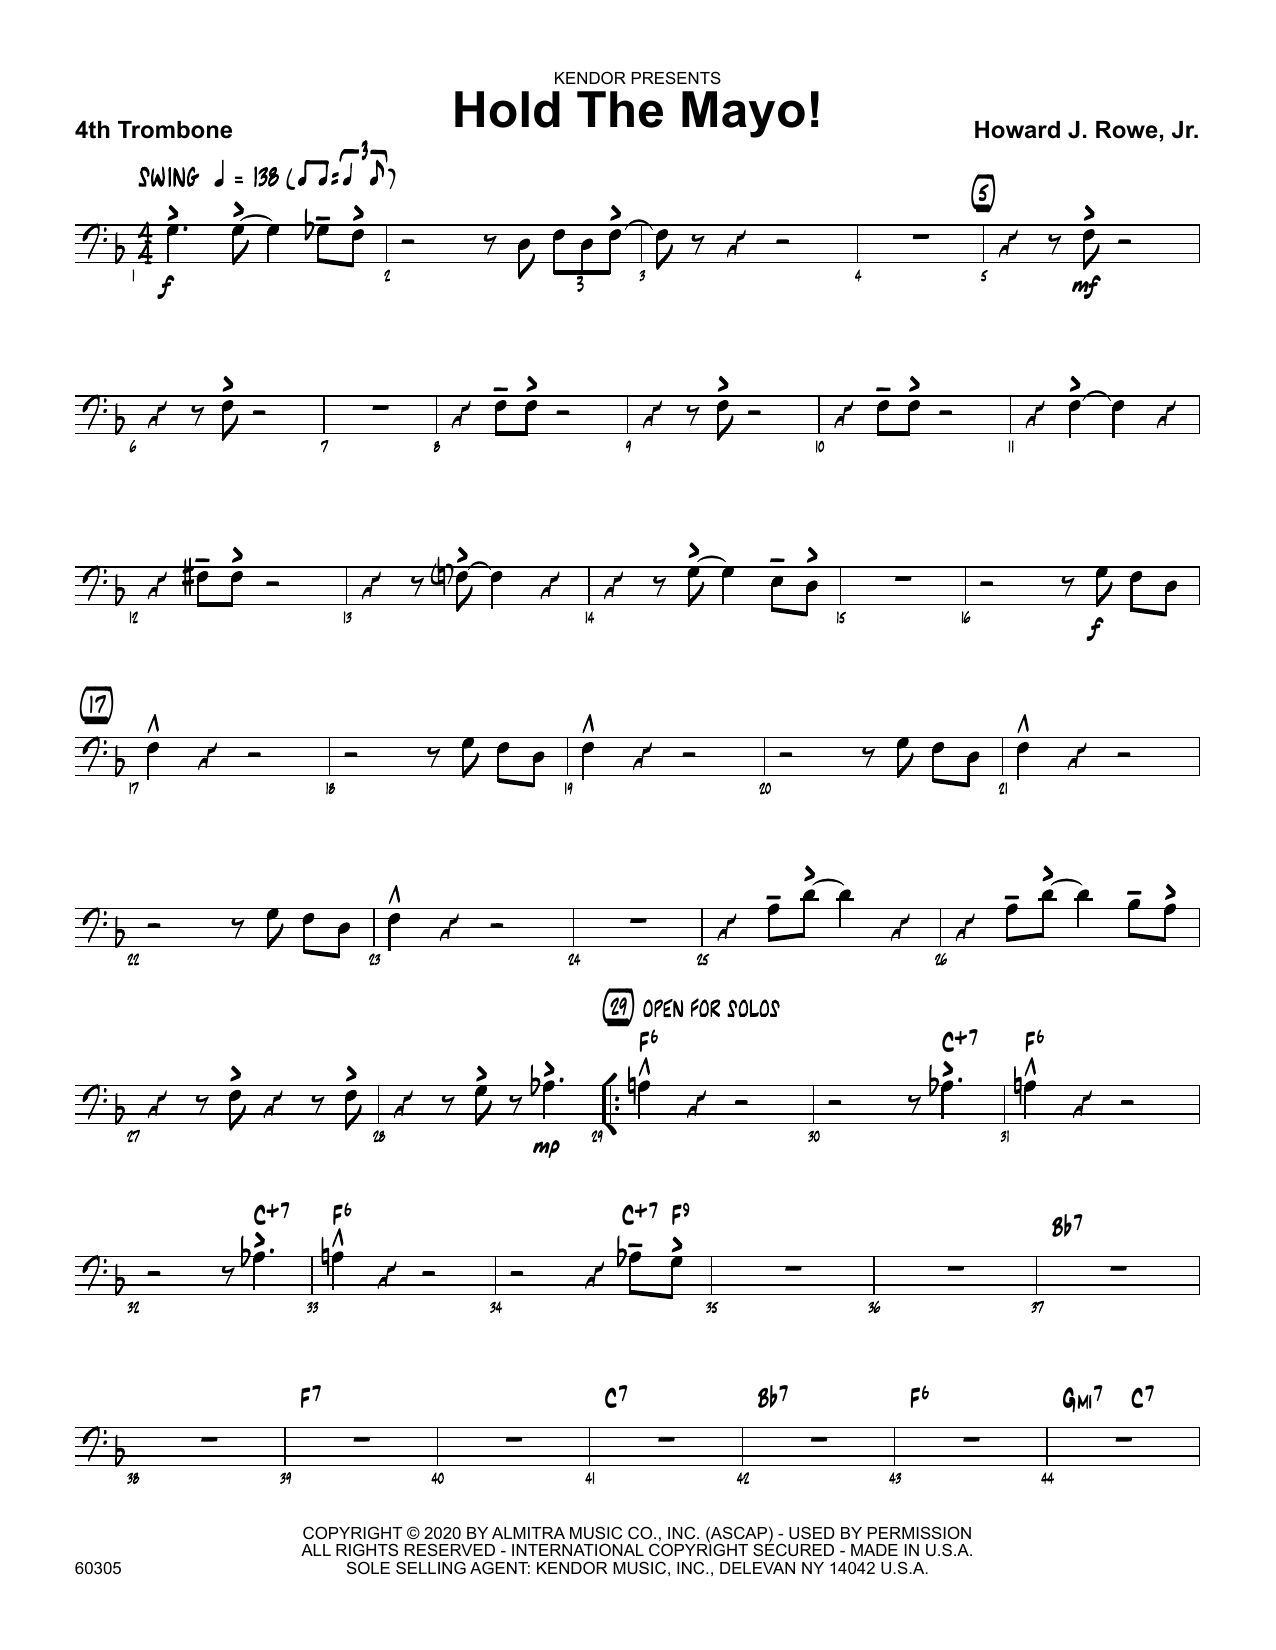 Download Howard Rowe Hold The Mayo! - 4th Trombone Sheet Music